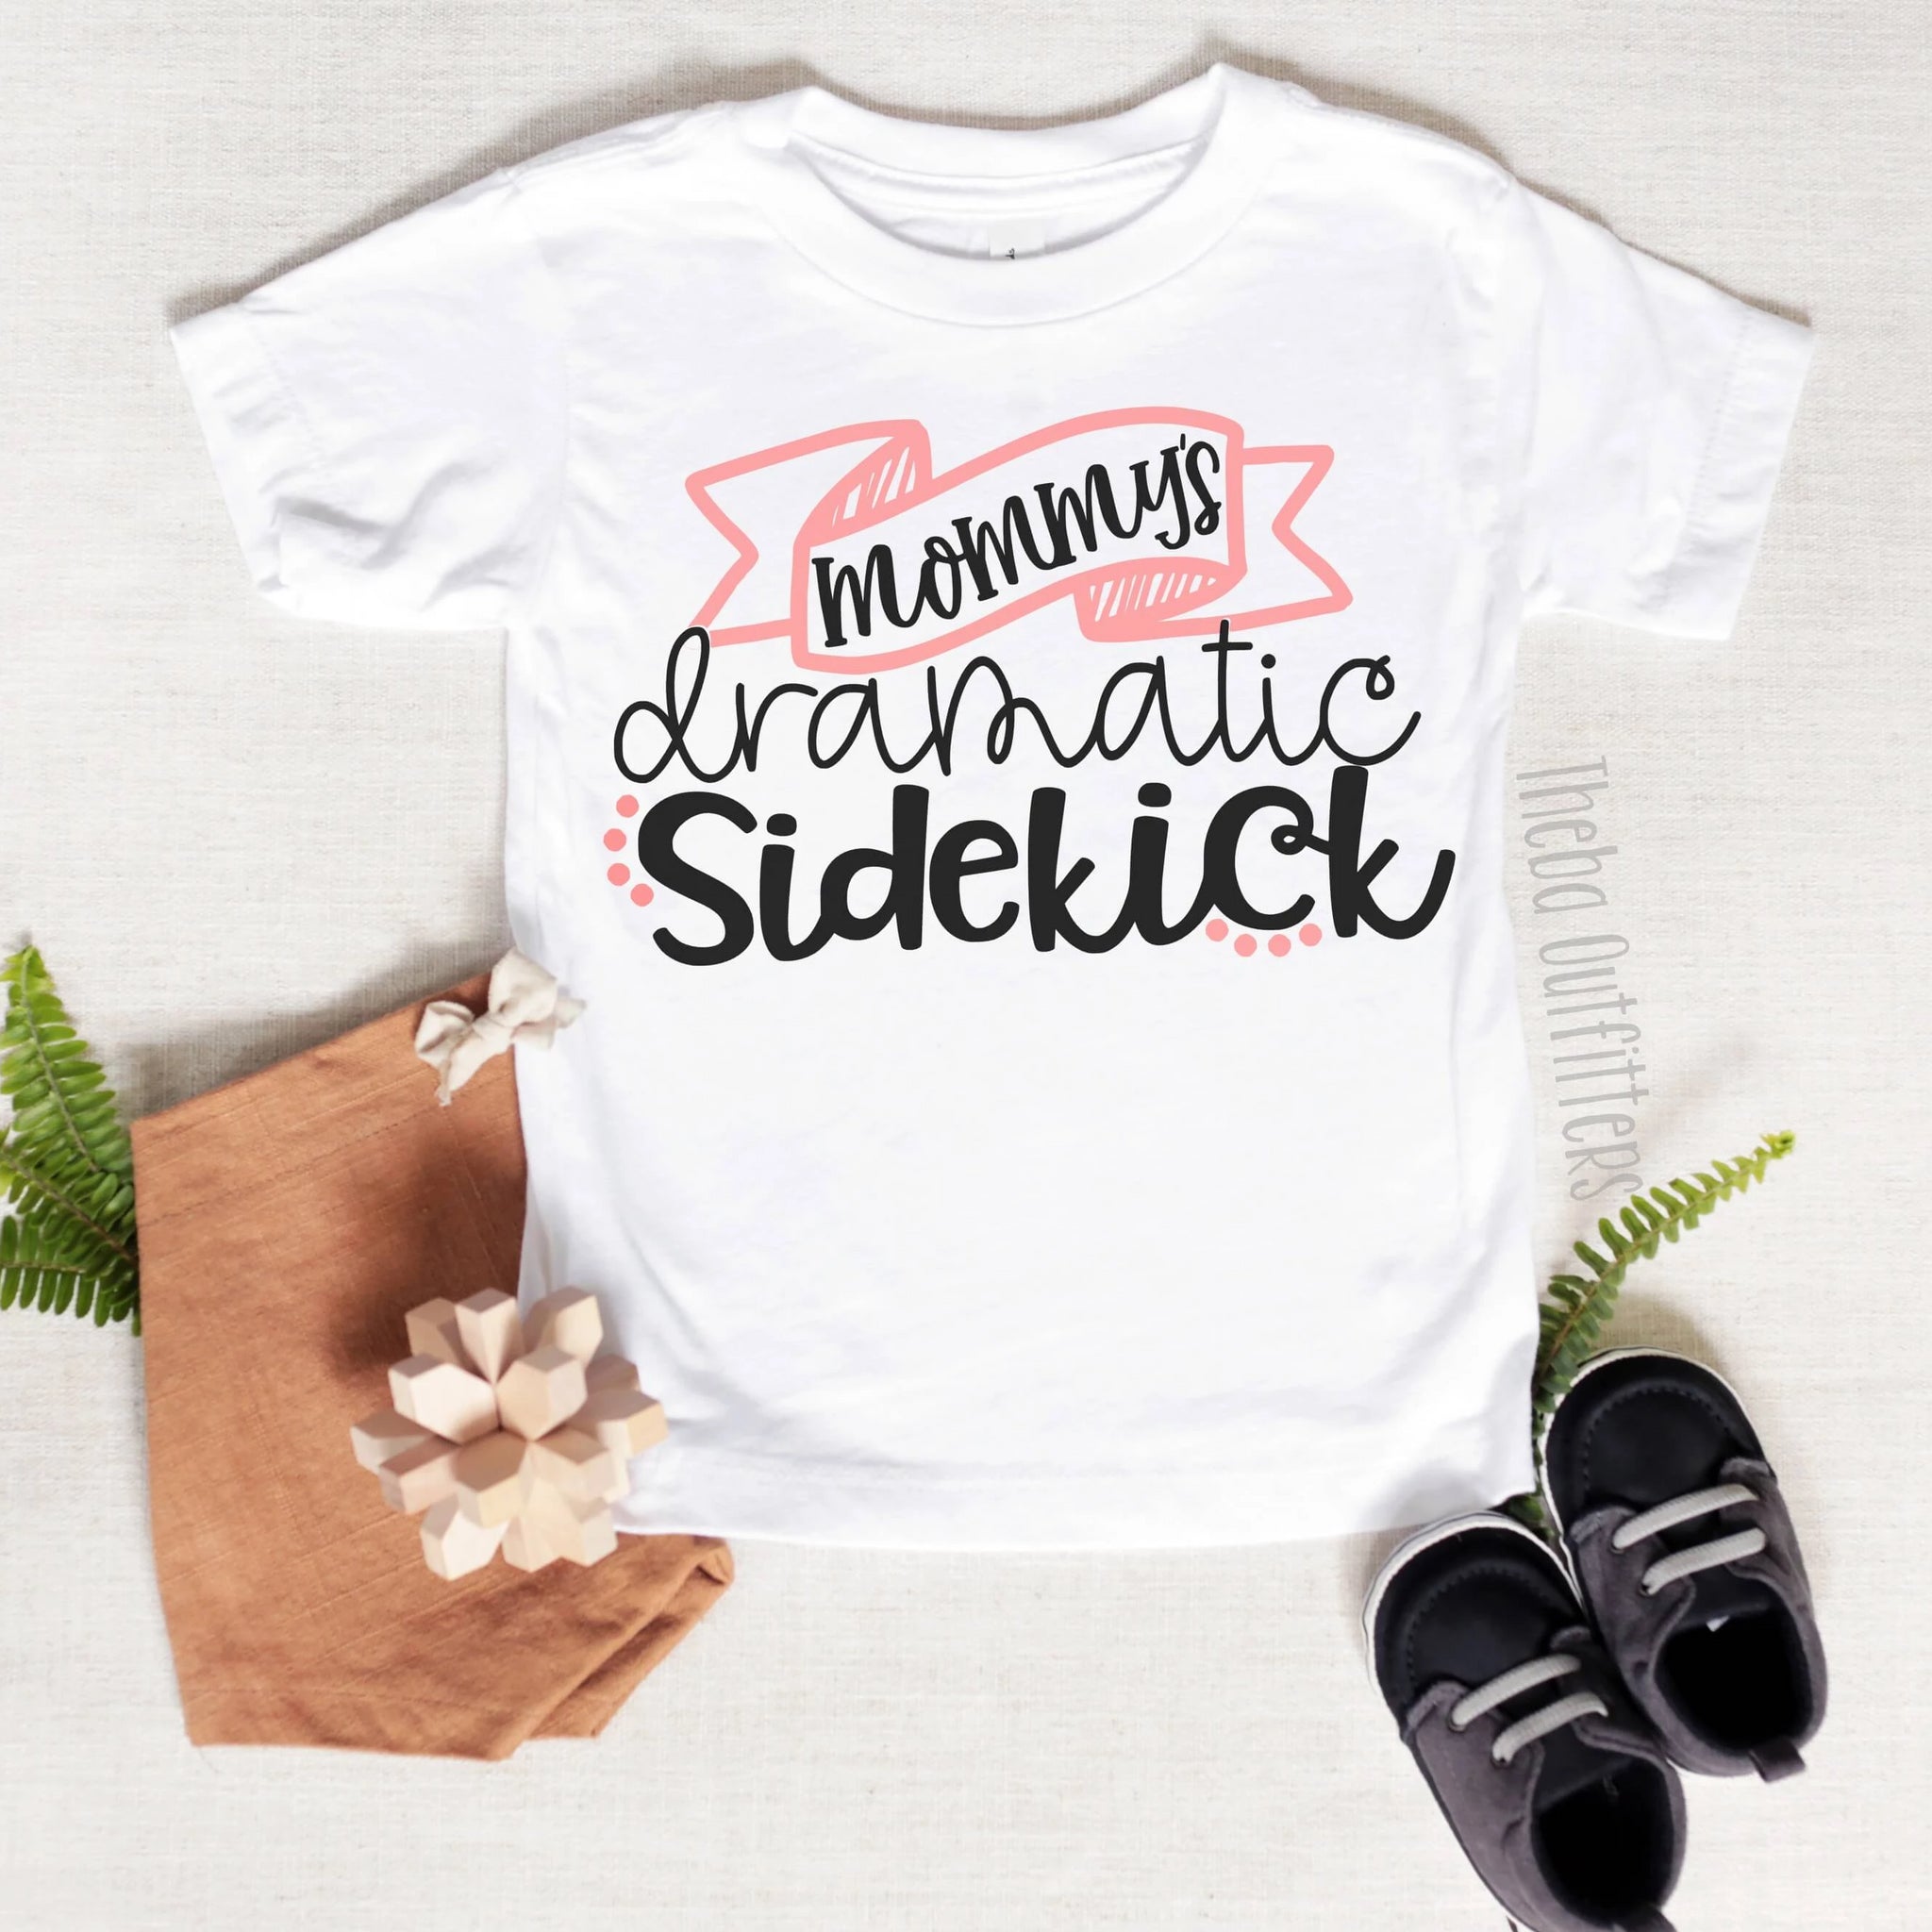 'Mommy's Dramatic Sidekick' Onesie Tee Shirt Baby Infant Toddler Theba Outfitters 